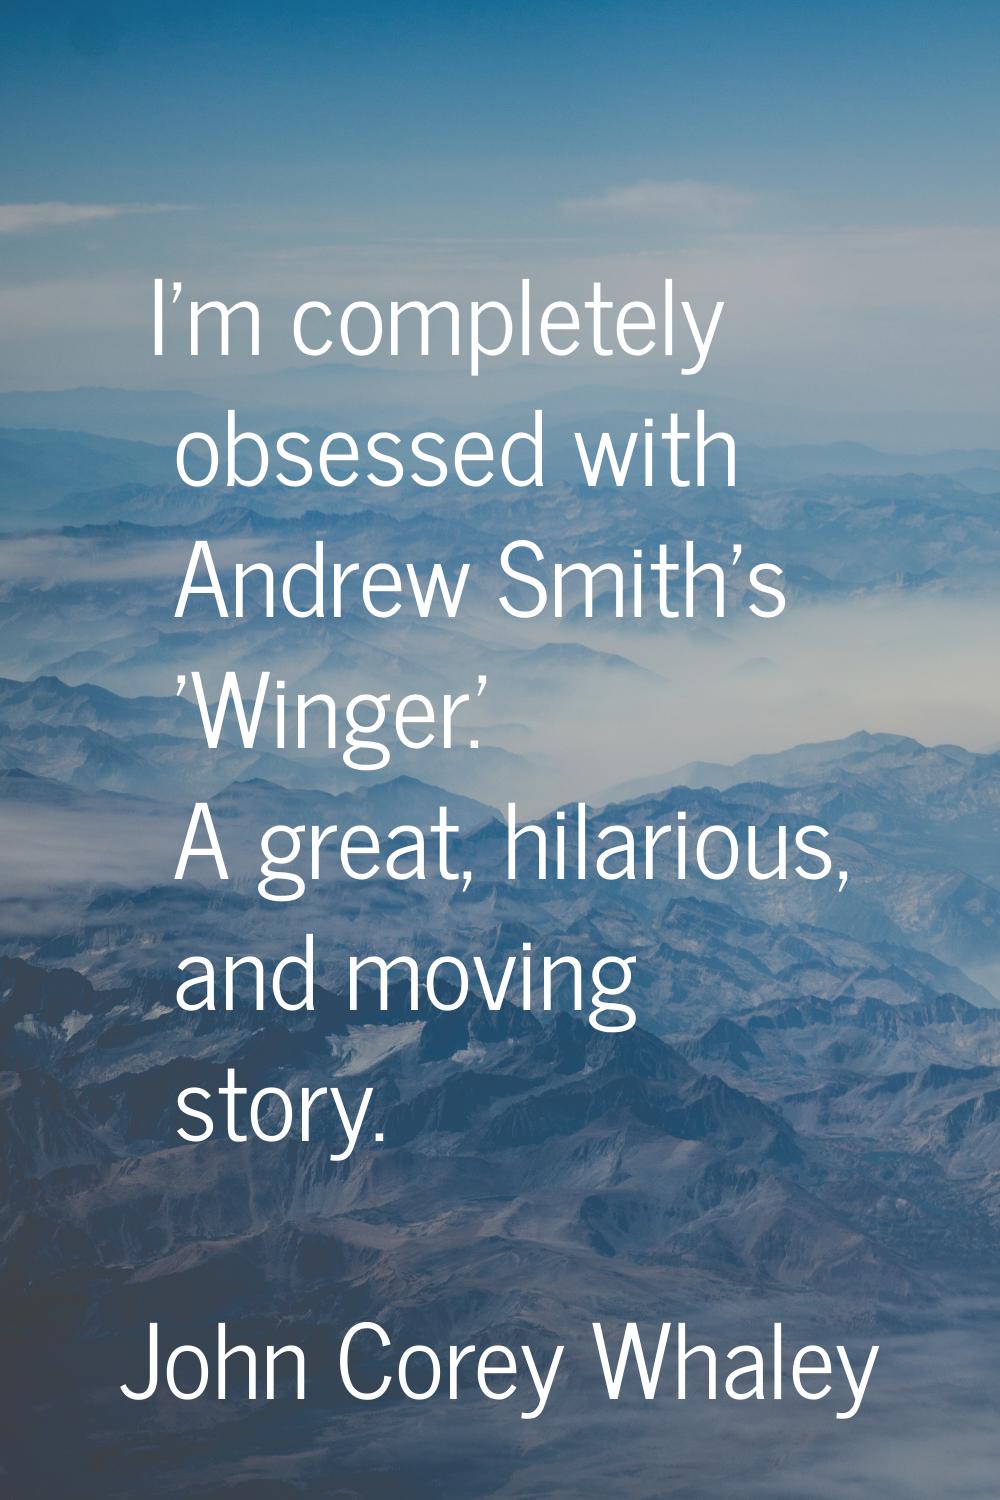 I'm completely obsessed with Andrew Smith's 'Winger.' A great, hilarious, and moving story.